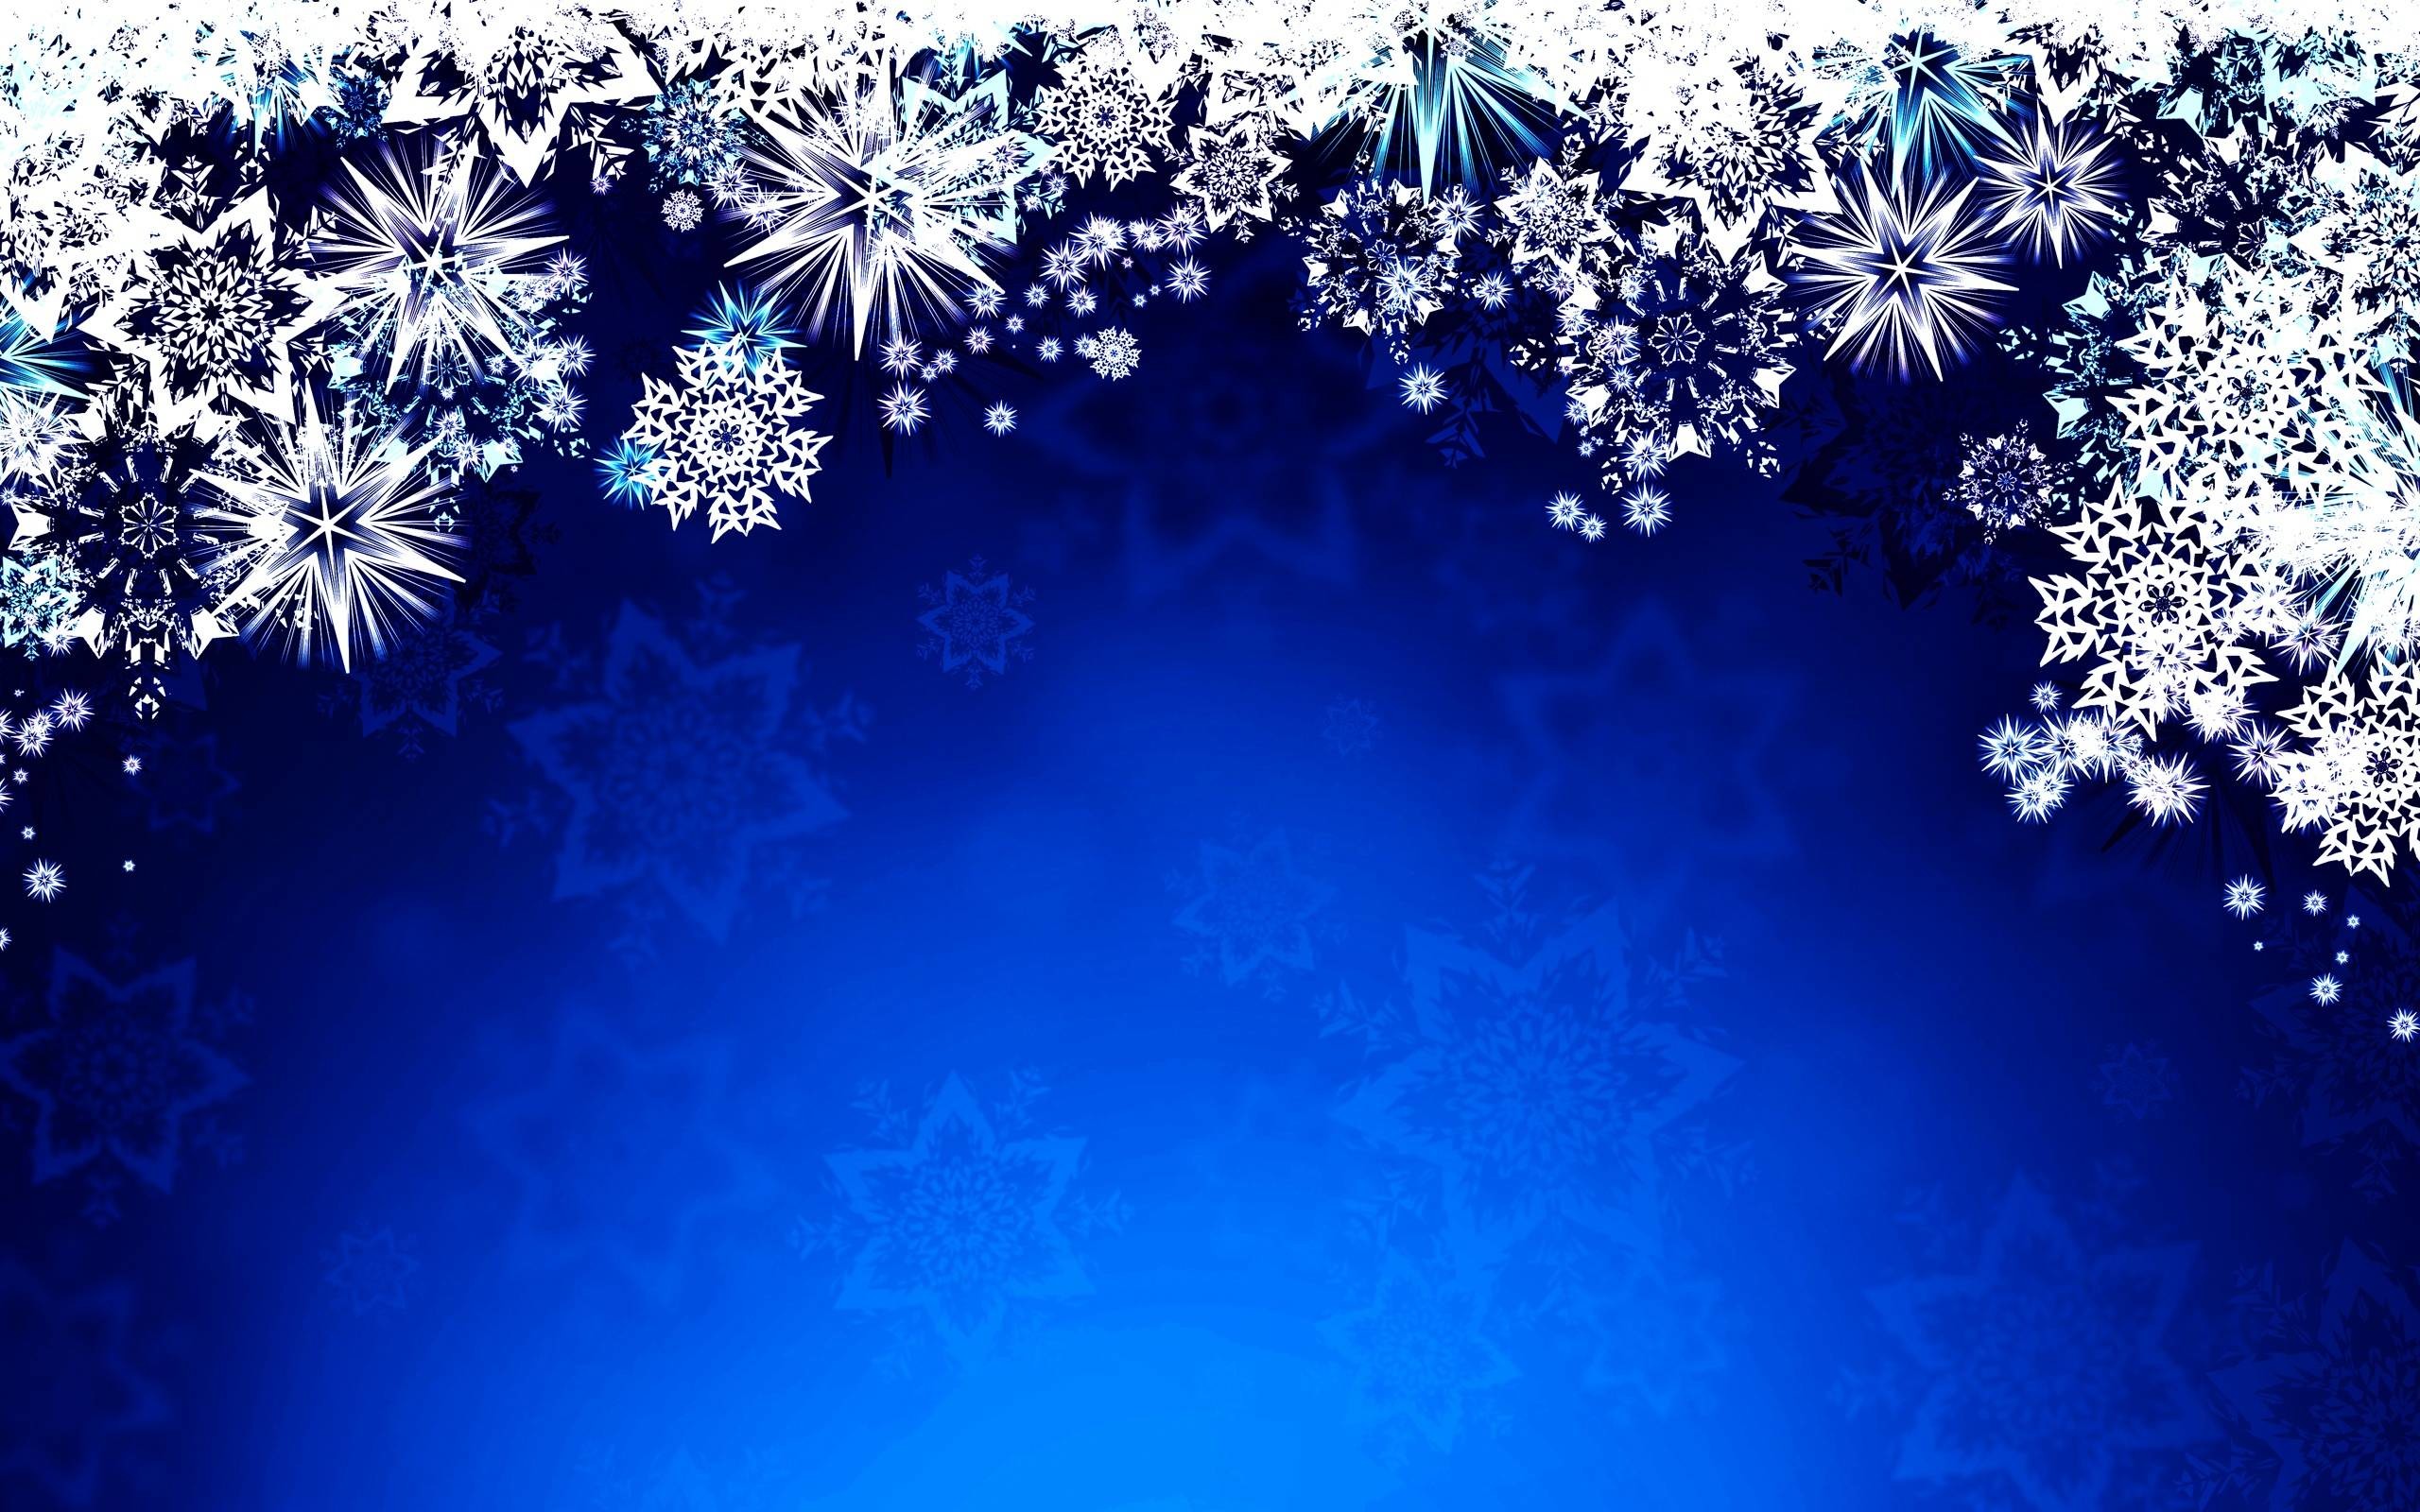 2560x1600 Snowflakes Wallpapers - Full HD wallpaper search